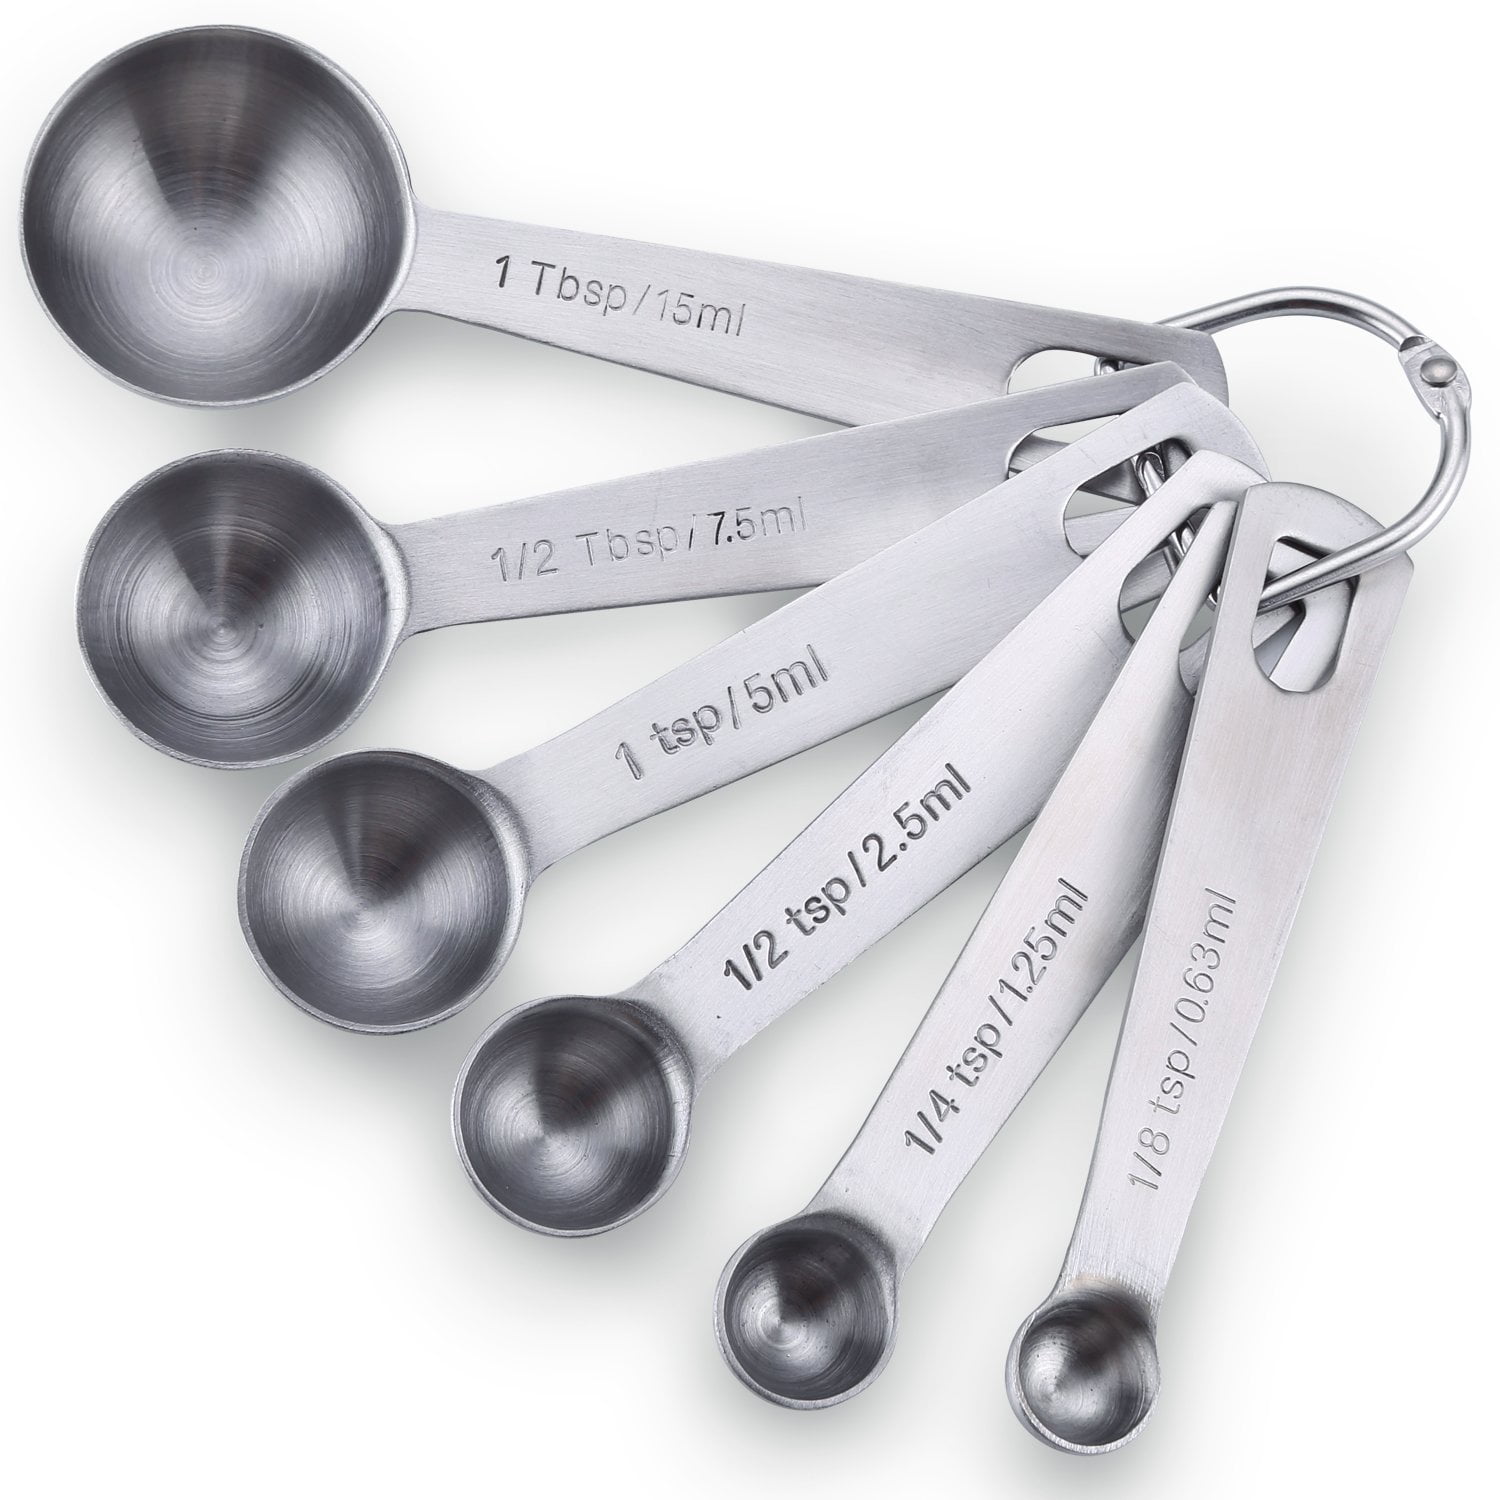 Gliving Measuring Cups and Spoons Set Stainless Steel, Chef 6pcs Round Spoons with Handle for Dry or Liquid Ingredient